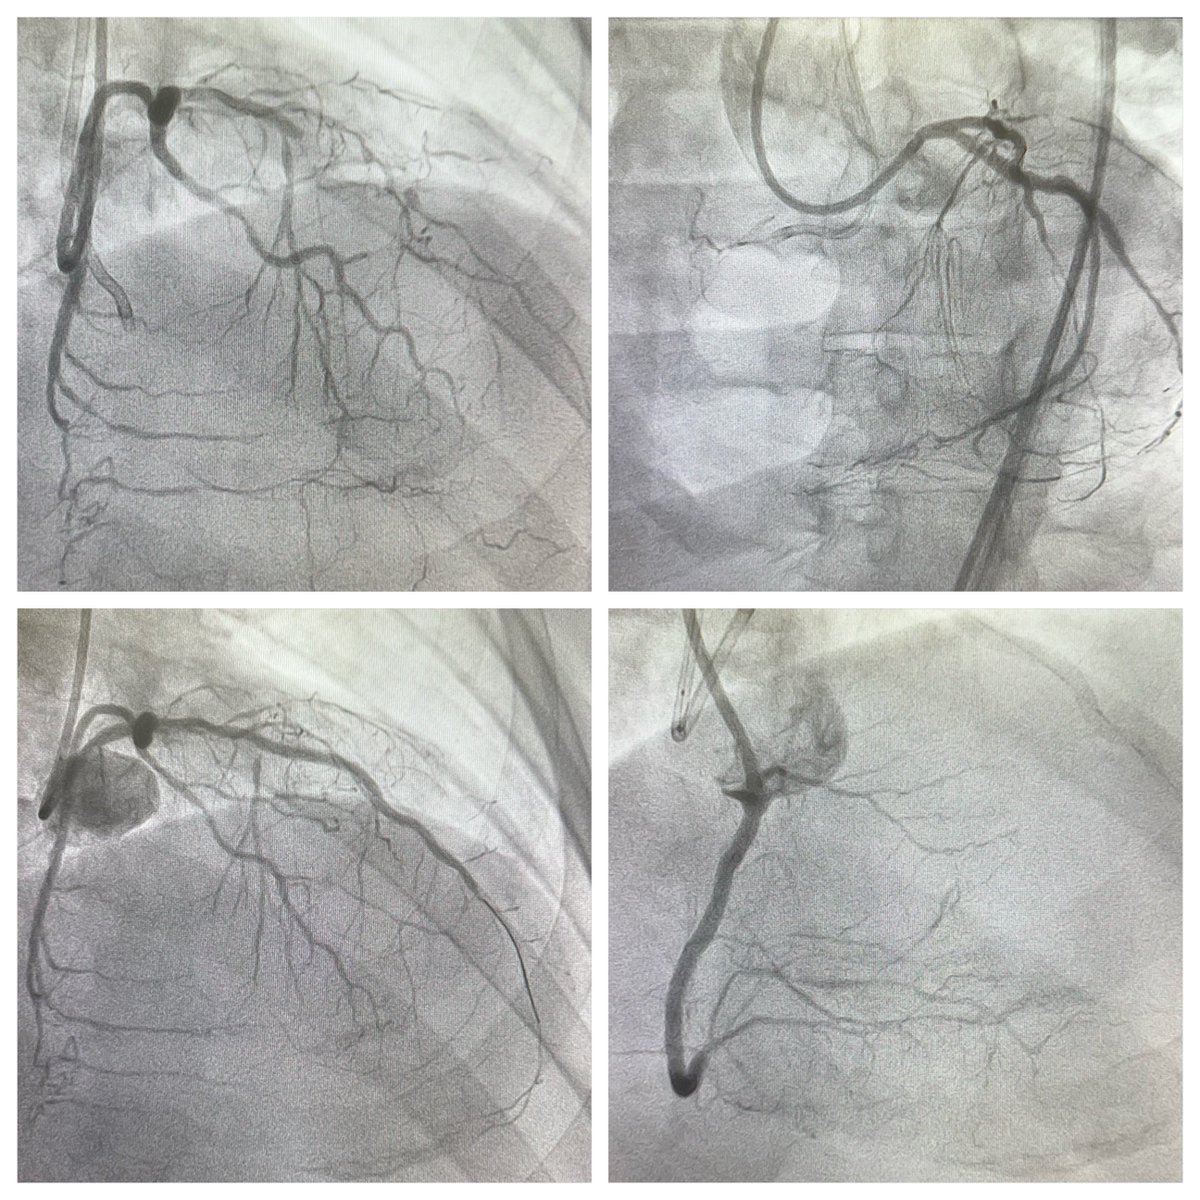 44👨🏻‍🦰, ischemic CMP. LCx STEMI w/ CS in September/23 on top of RCA/LAD CTOs. EF 30s. LAD was recanalized during LCx PPCI. LAD Re-occluded. Very symptomatic. Was referred for CABG but turned down unfortunately. Now LAD IS-CTO antegrade PCI & RCA CTO PCI using retrograde approach.…